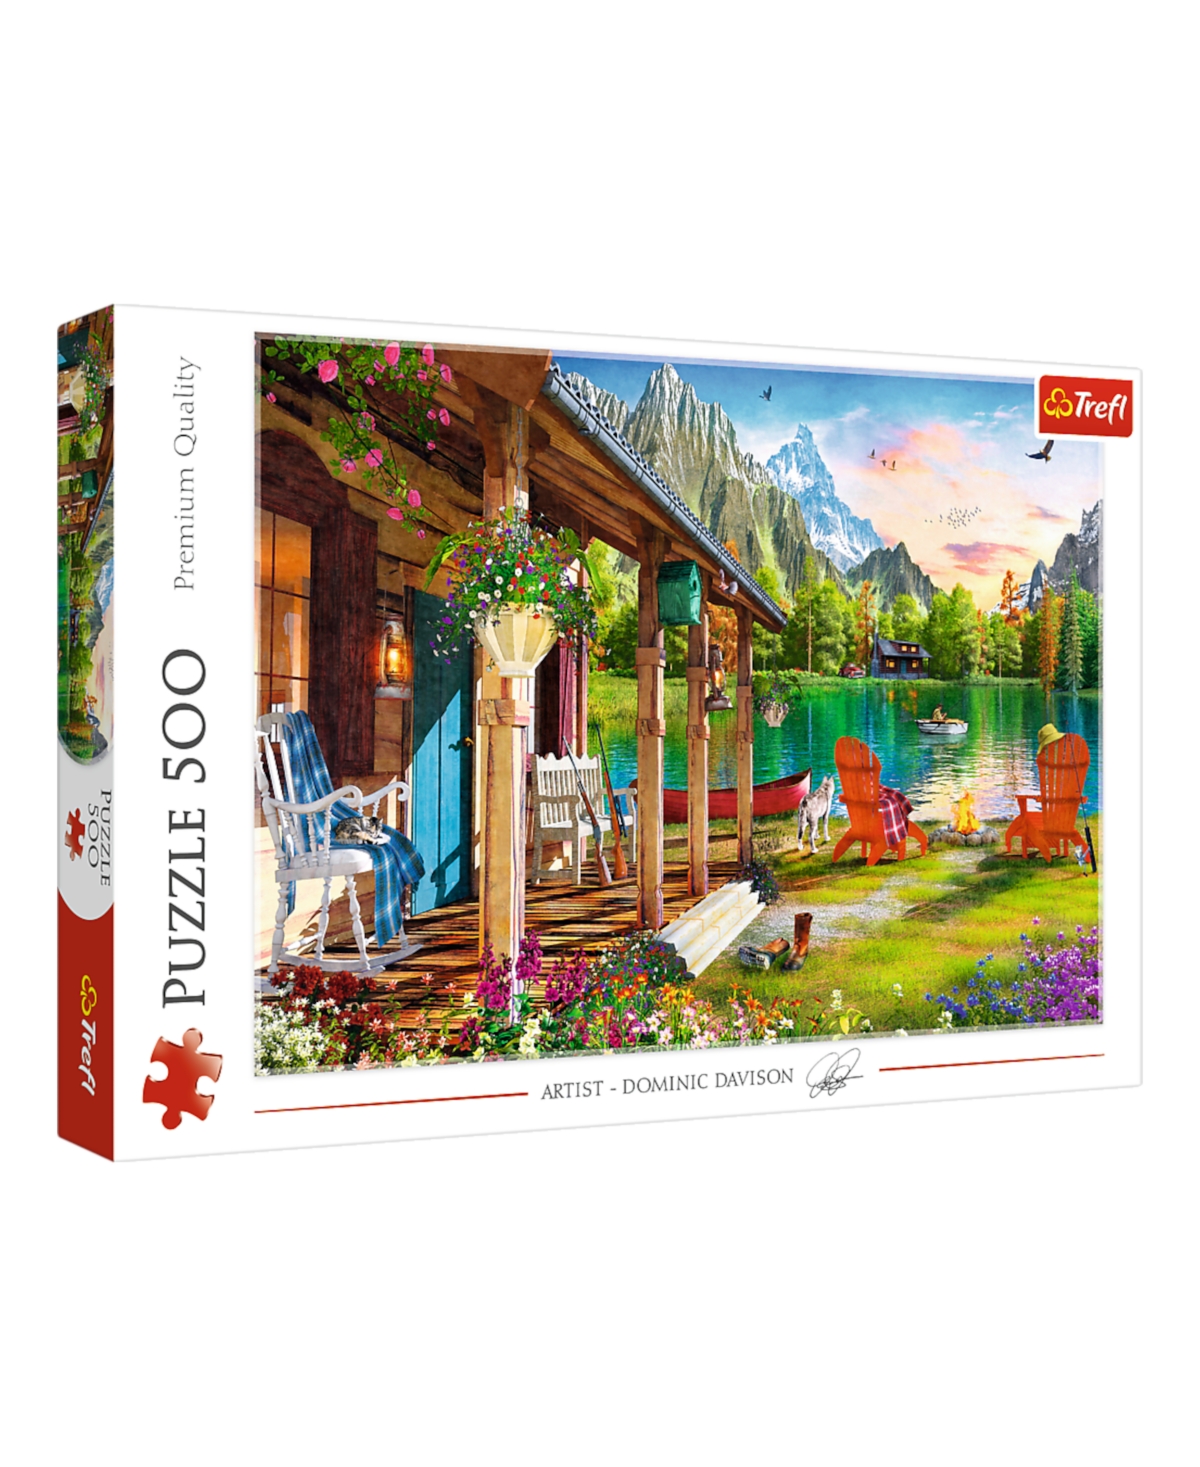 Trefl Red 500 Piece Puzzle- Cabin In The Mountains In Multi